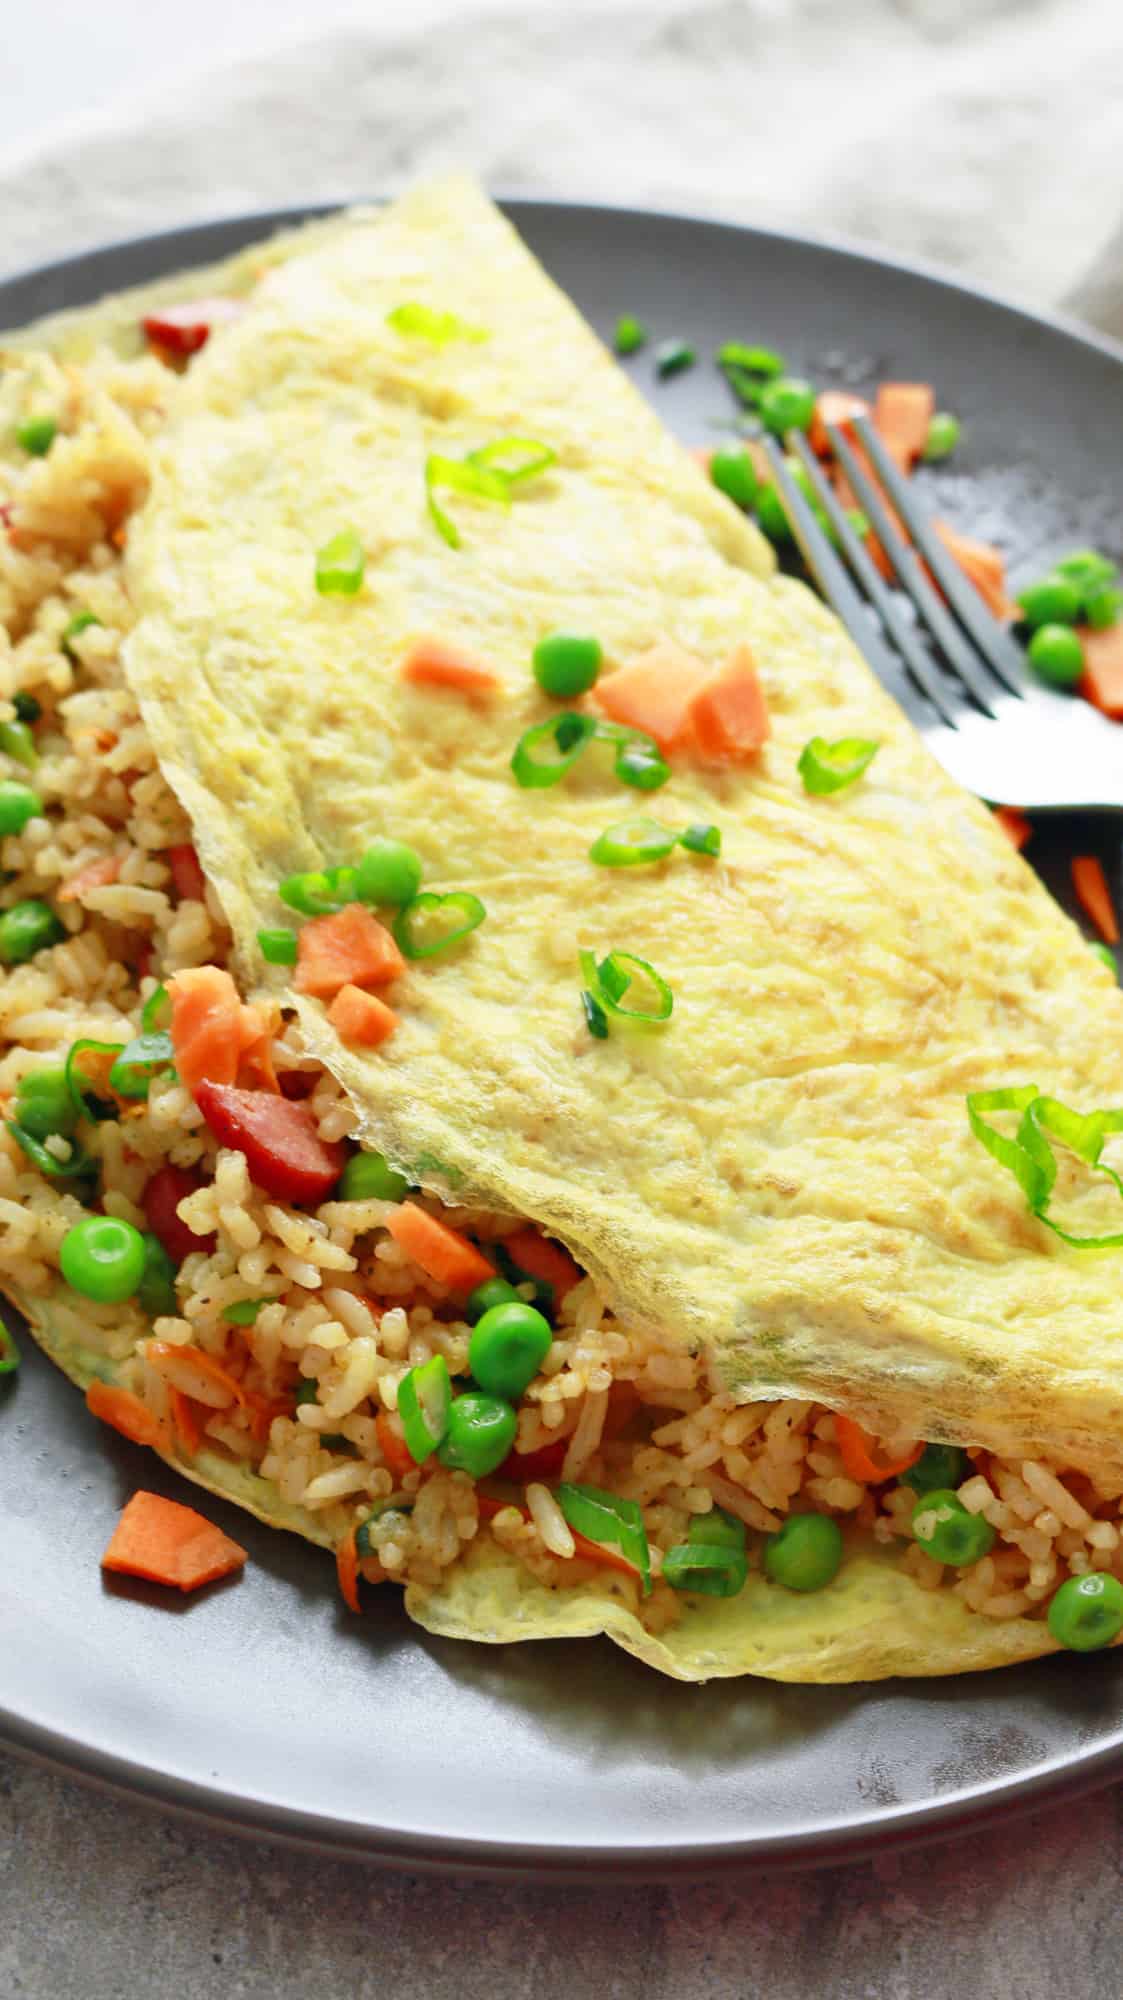 how to make hot dog fried rice with egg